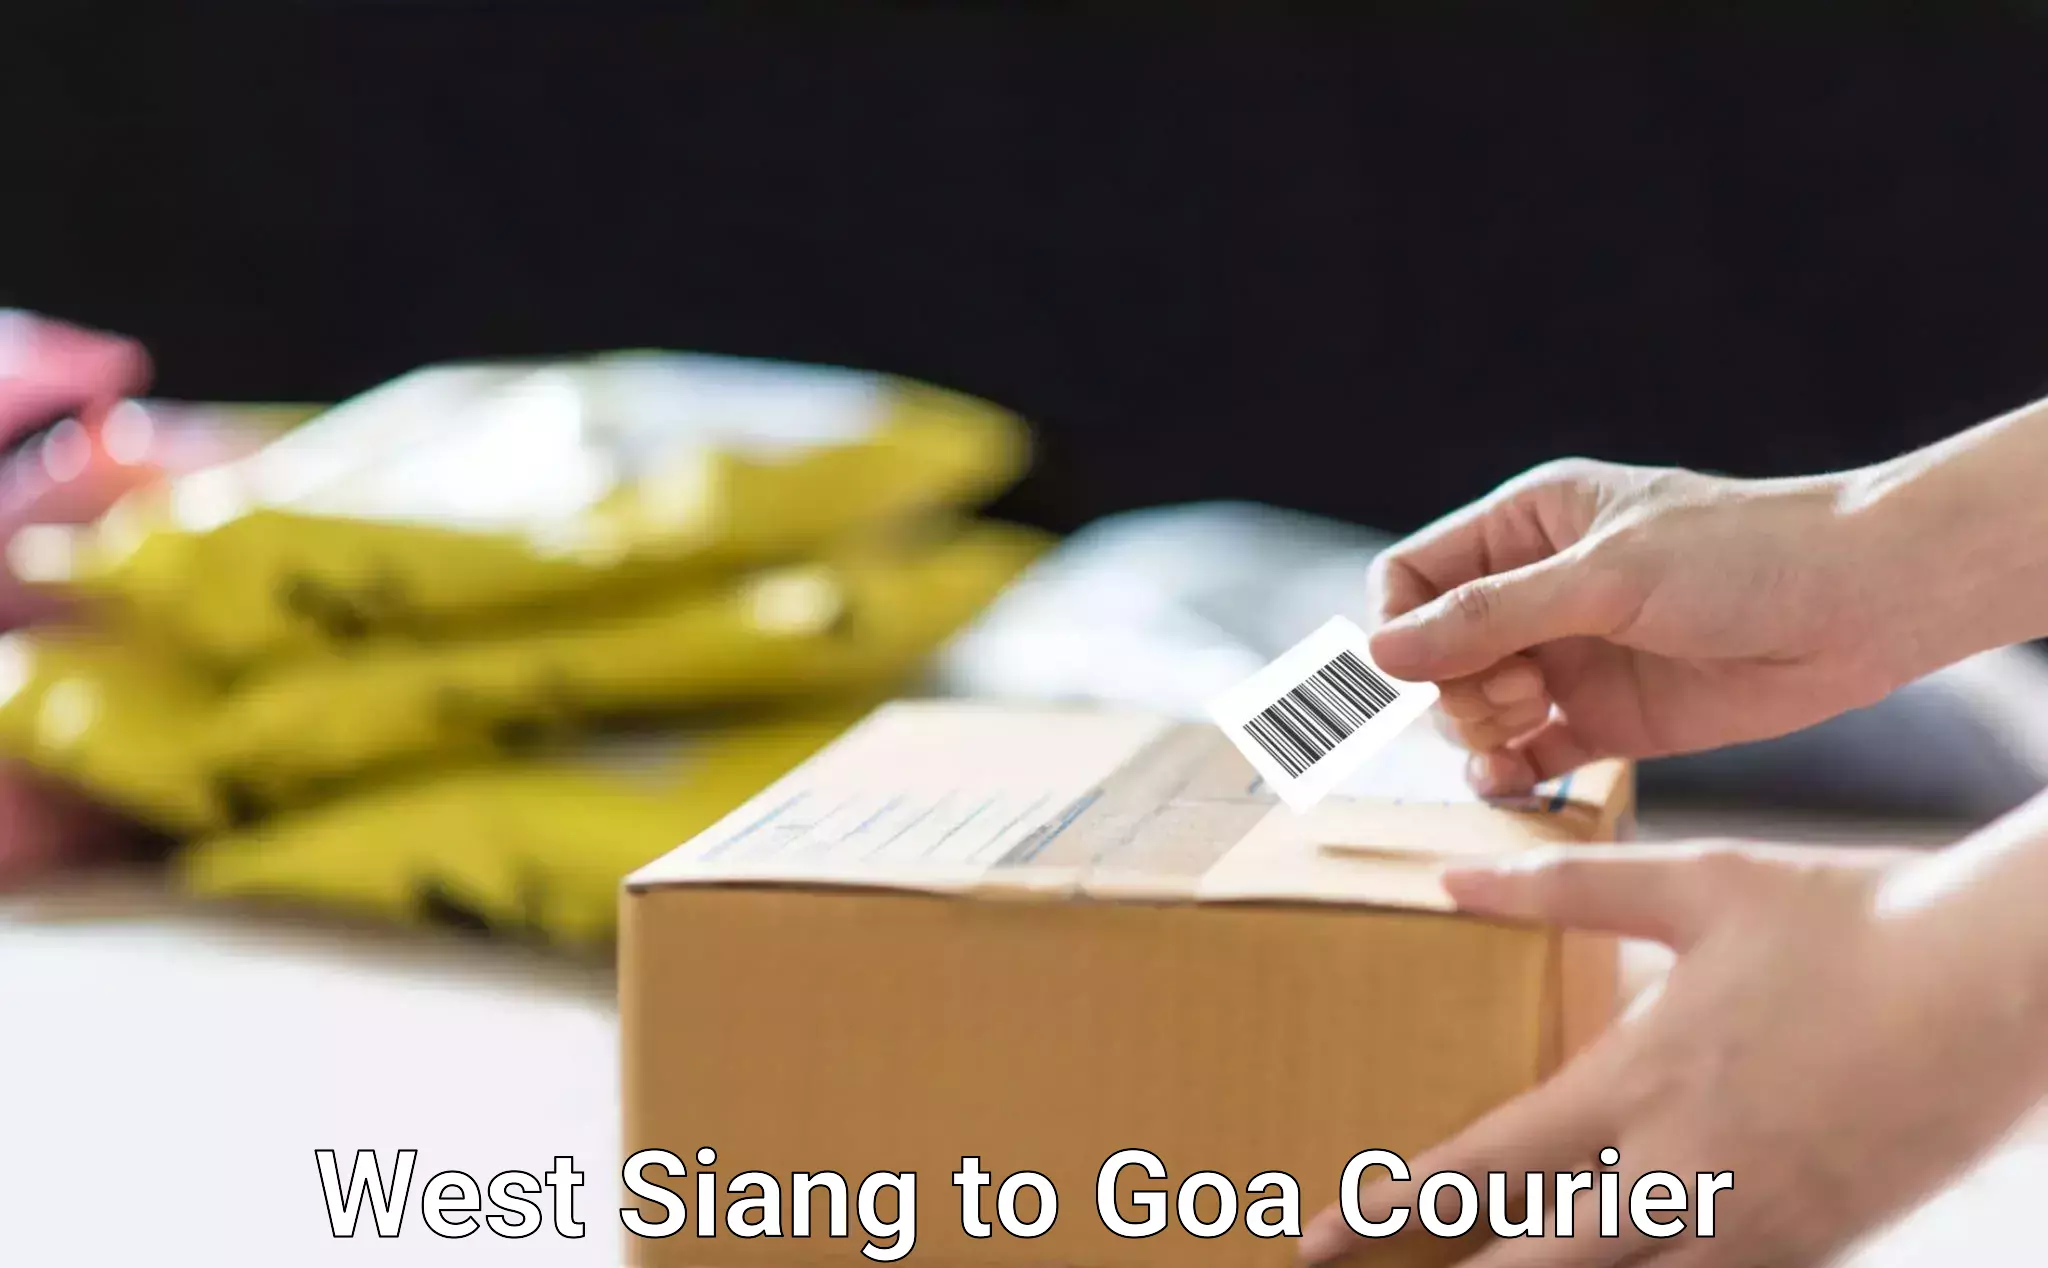 Professional courier handling West Siang to Goa University